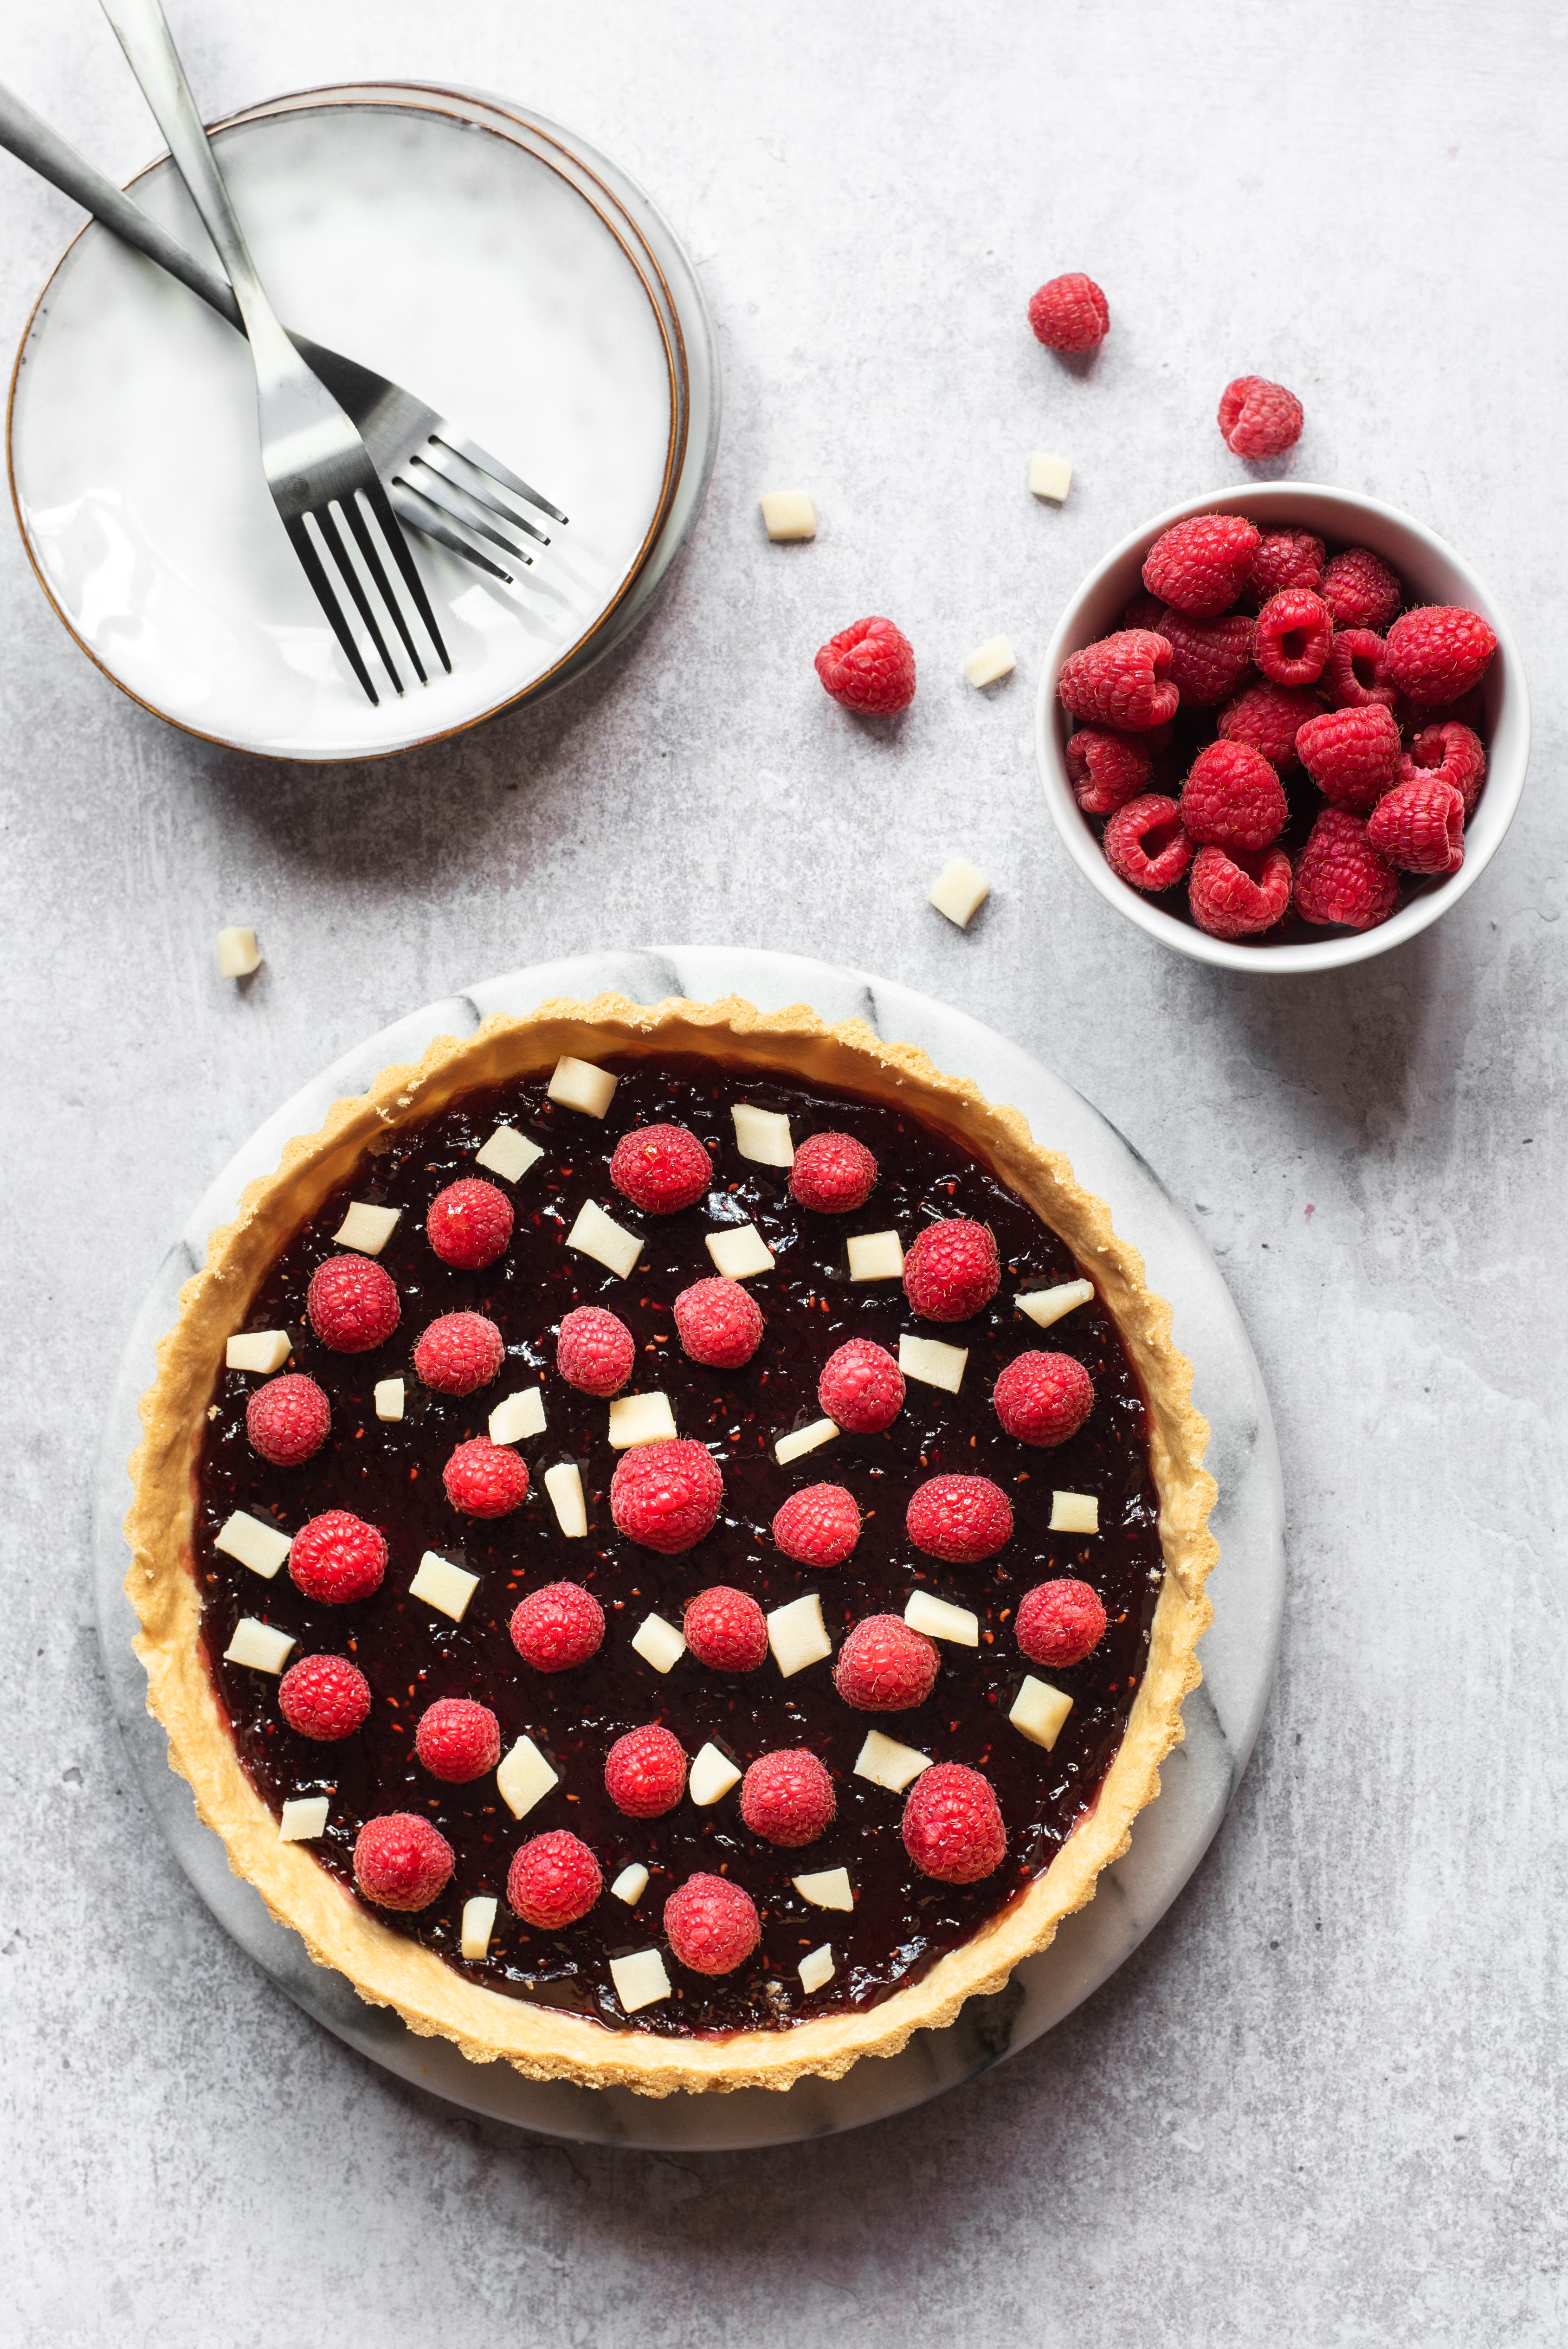 birds-eye view of a sweet tart topped with raspberries